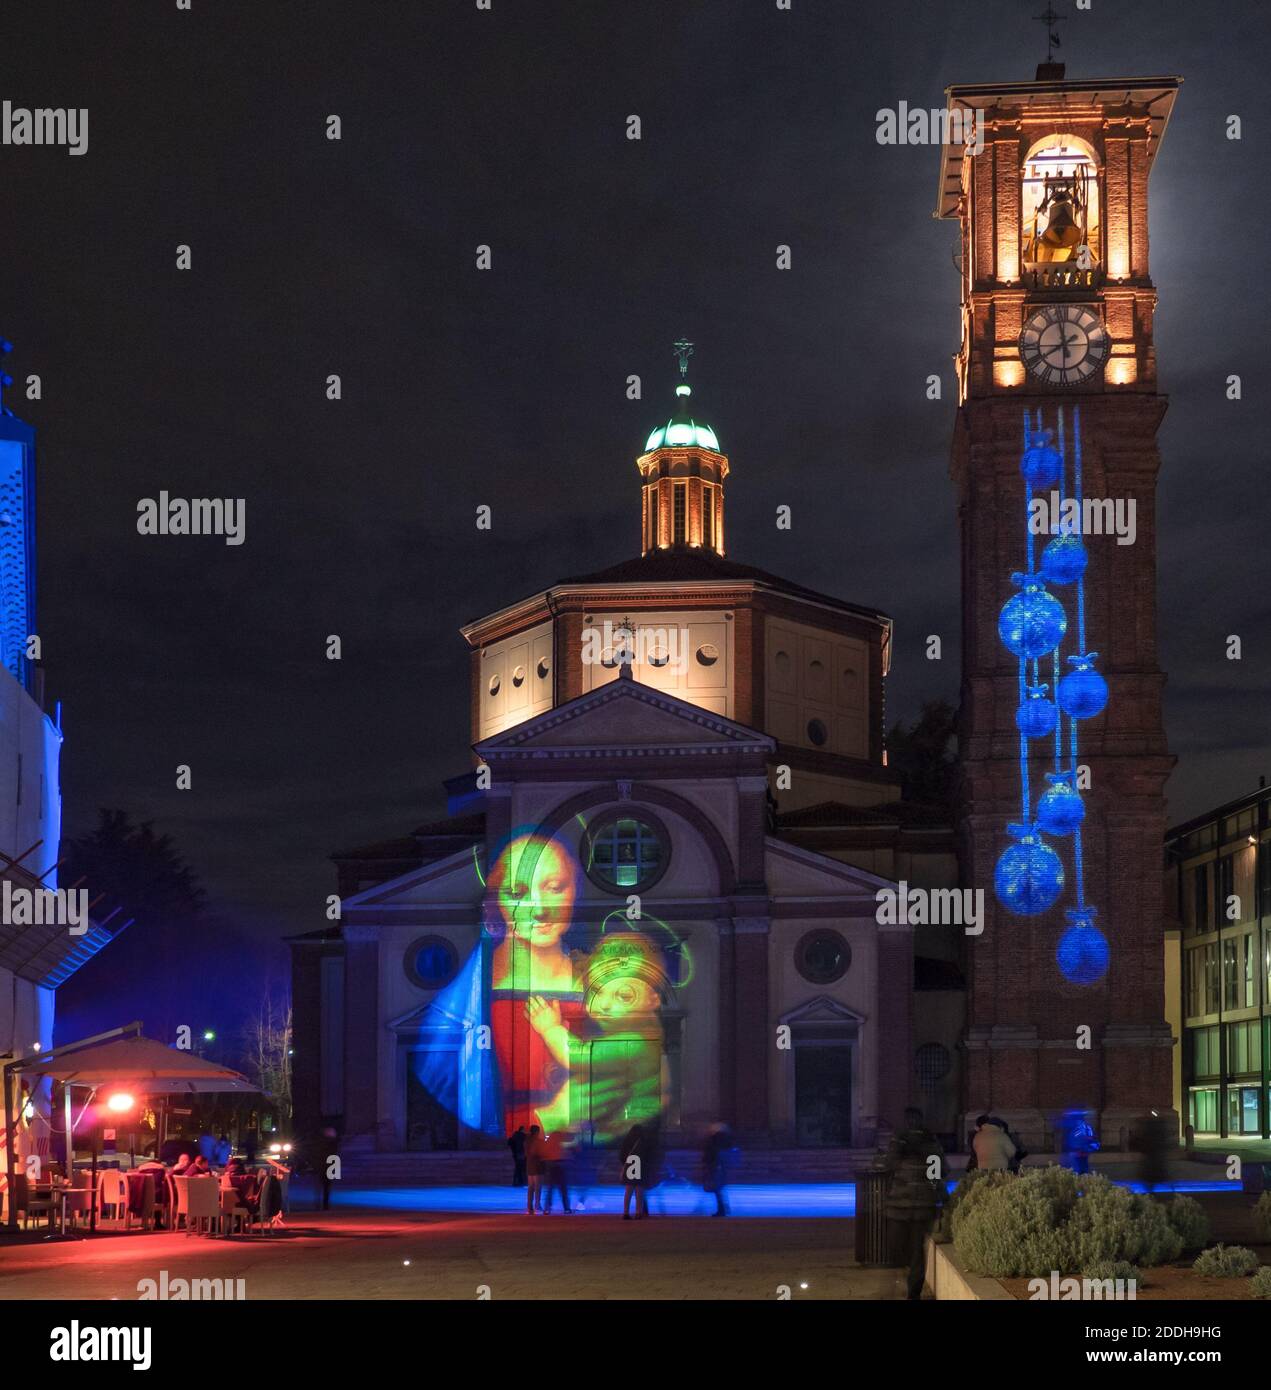 Christmas time in the city center.Xmas light and decorations on the church and tower bell.Legnano,Metropolitan city of Milan, Lombardy, Italy Stock Photo